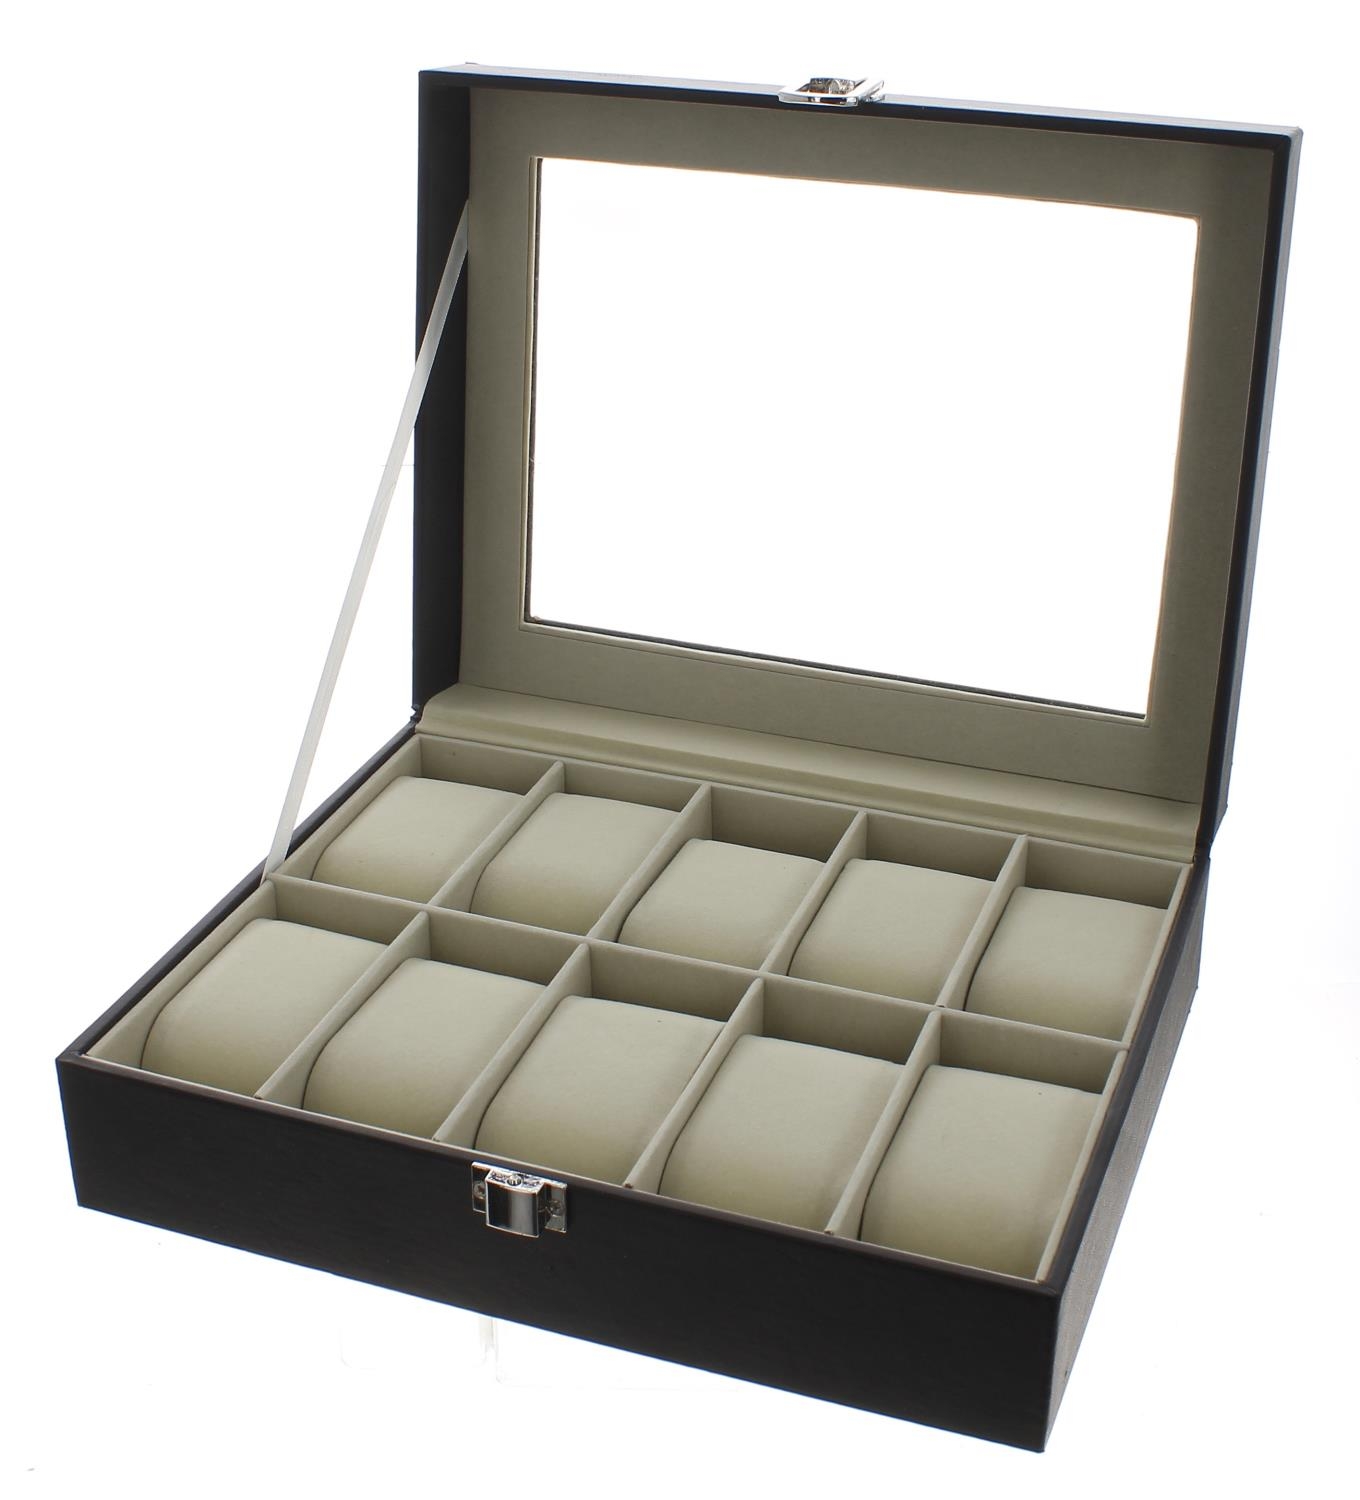 Automatic watch winder display case, glazed hinged lid and cream interior with two bi-directional - Bild 3 aus 4